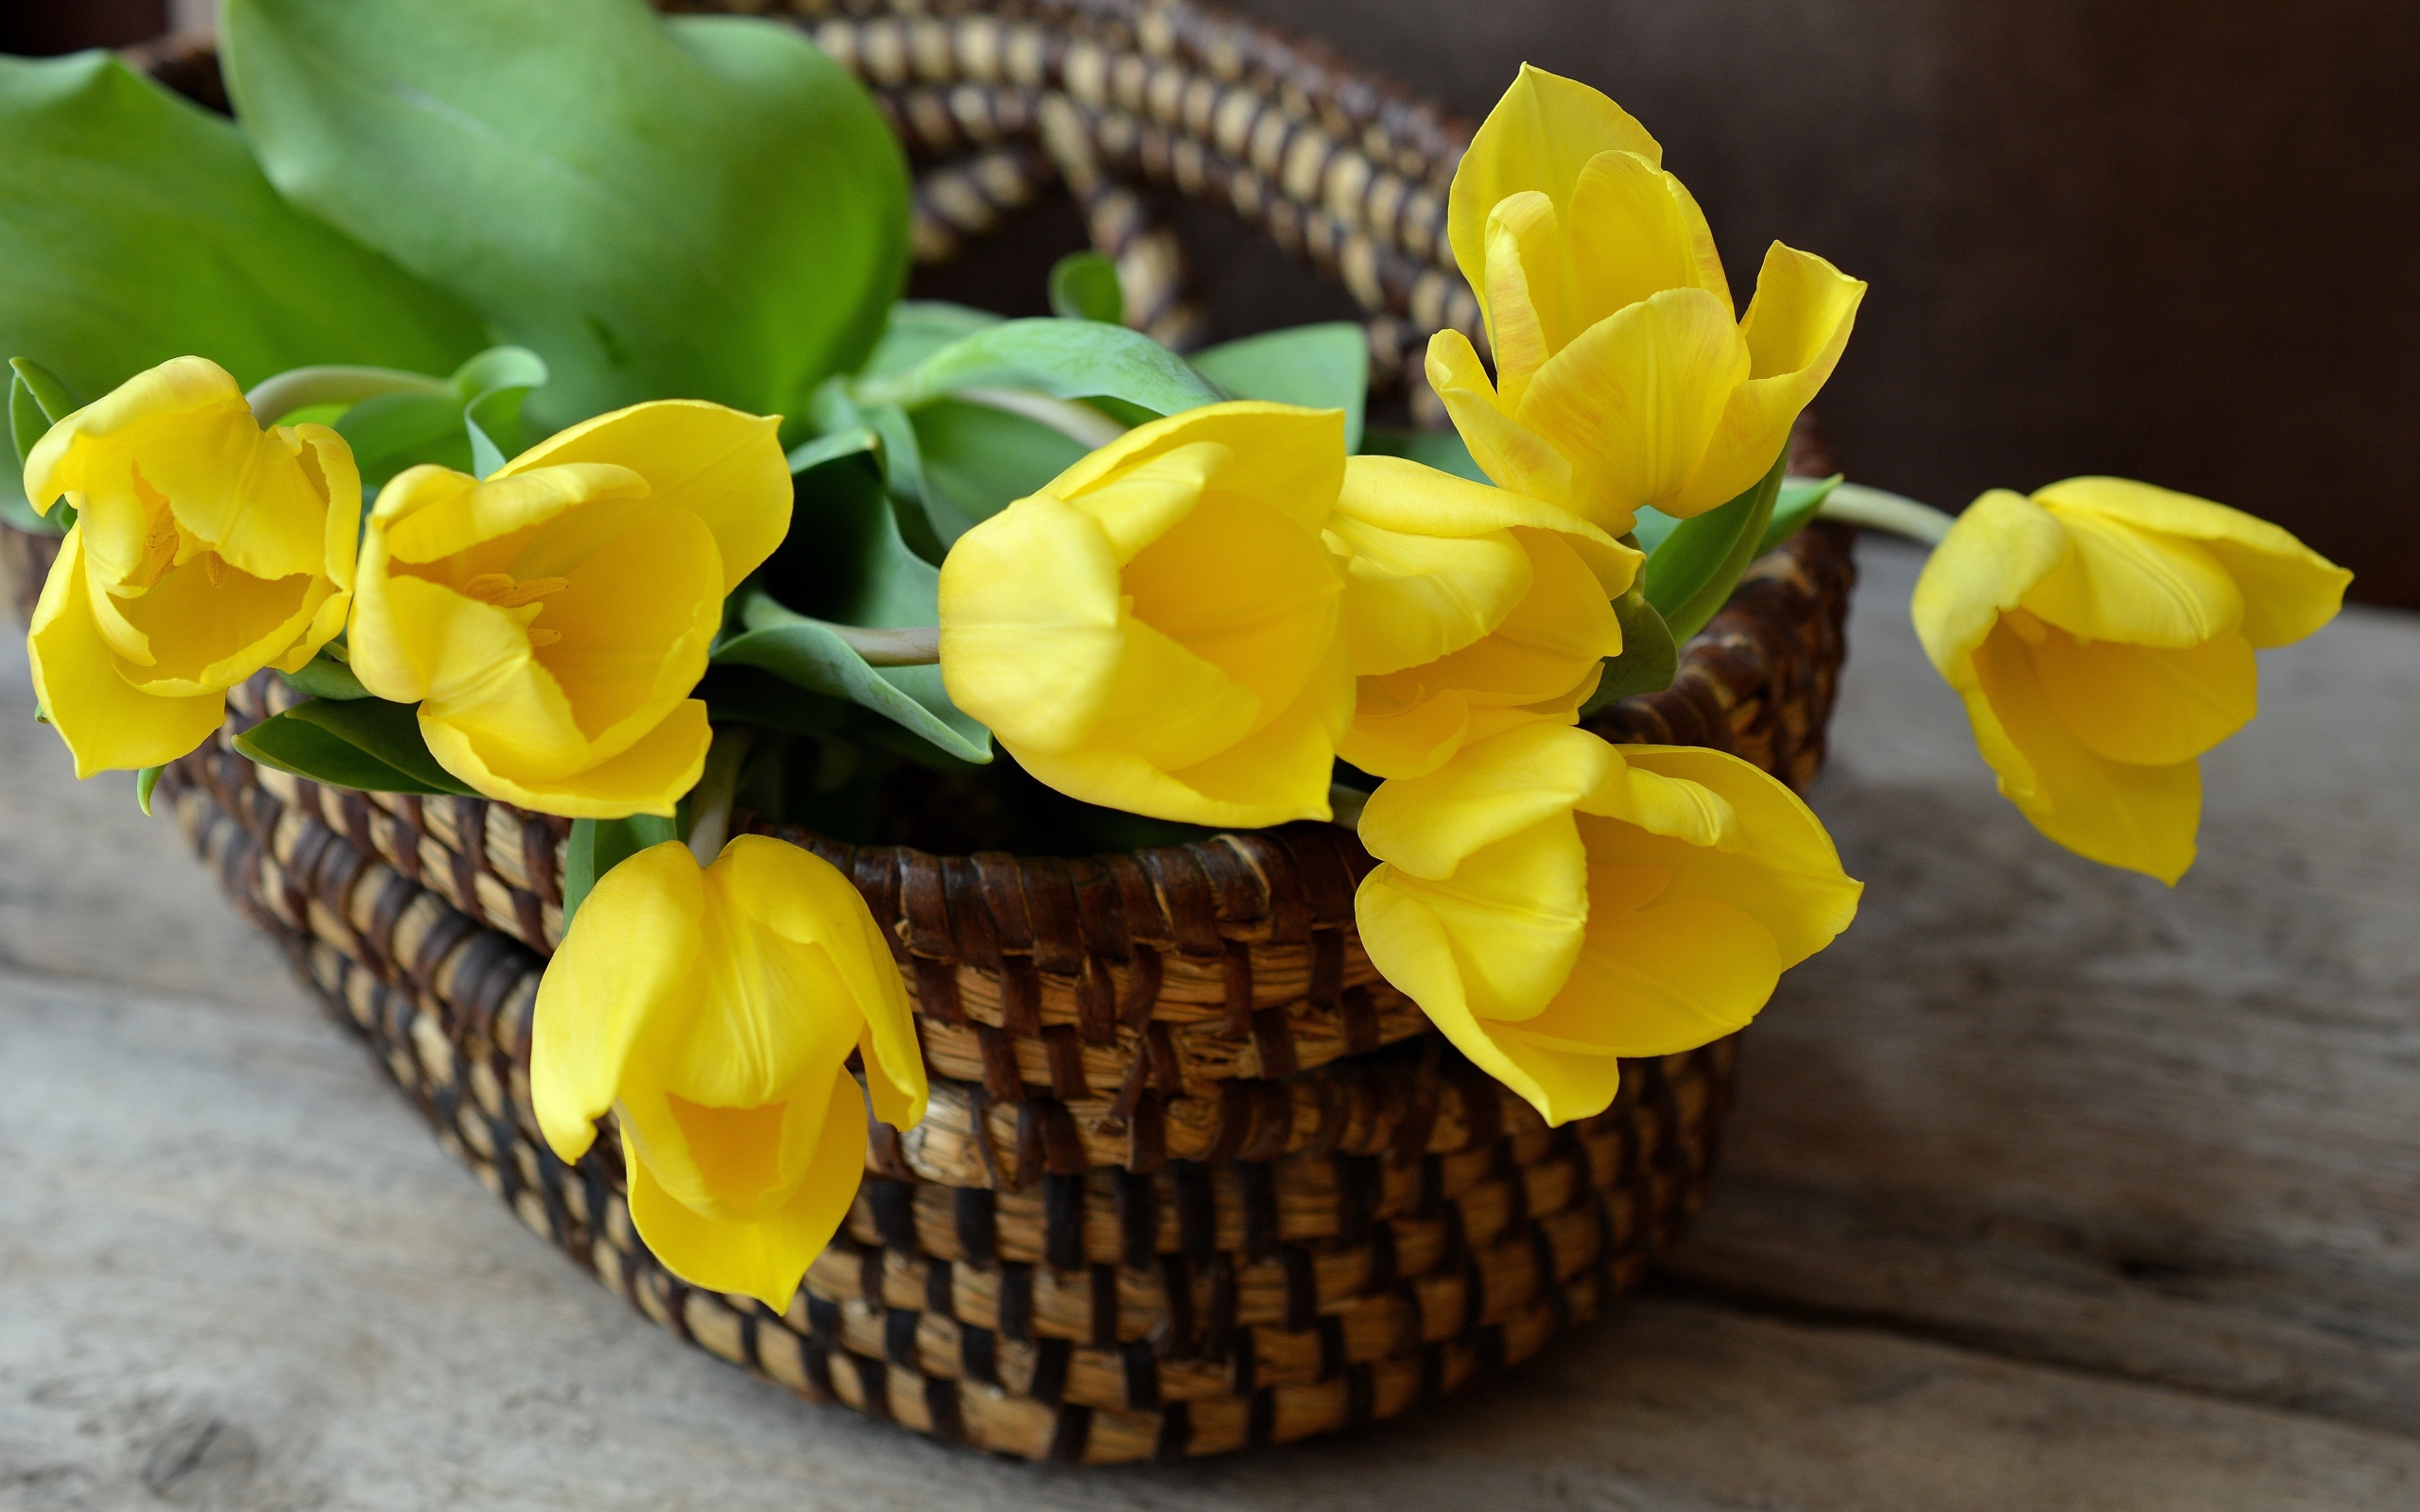 A bouquet of yellow tulips in a basket